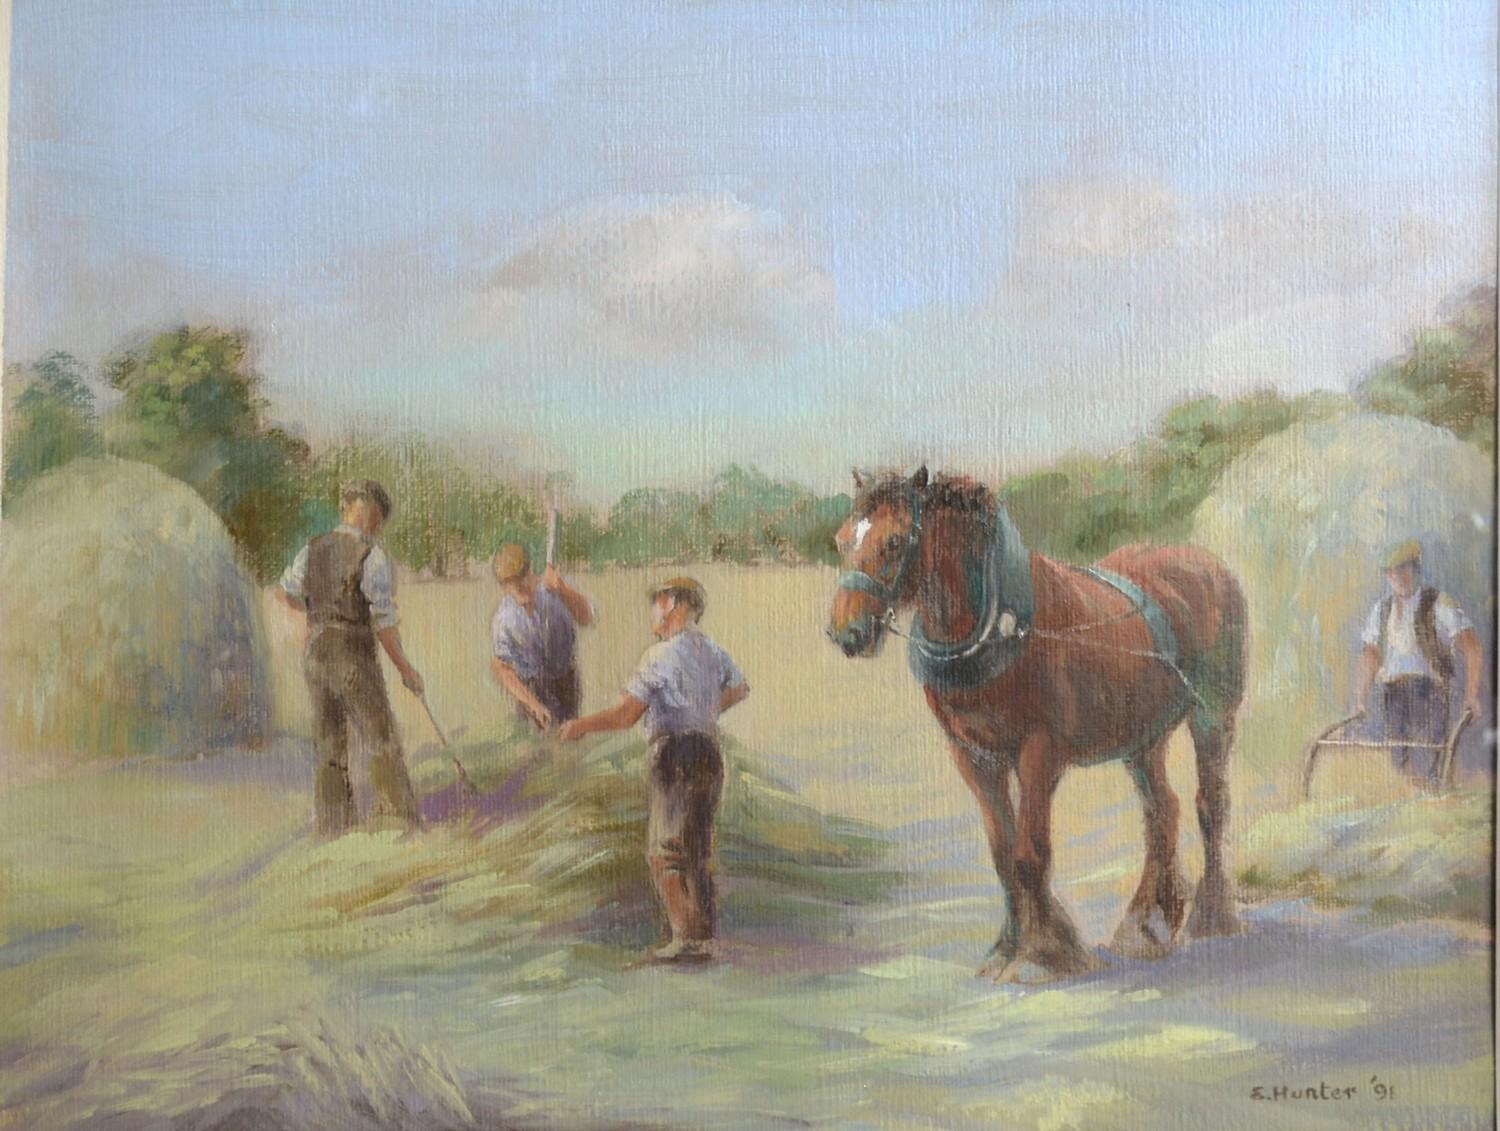 E Hunter 'Haymaking' Oil on Canvas, signed and dated 1991, 38 x 48 cms - Image 2 of 4